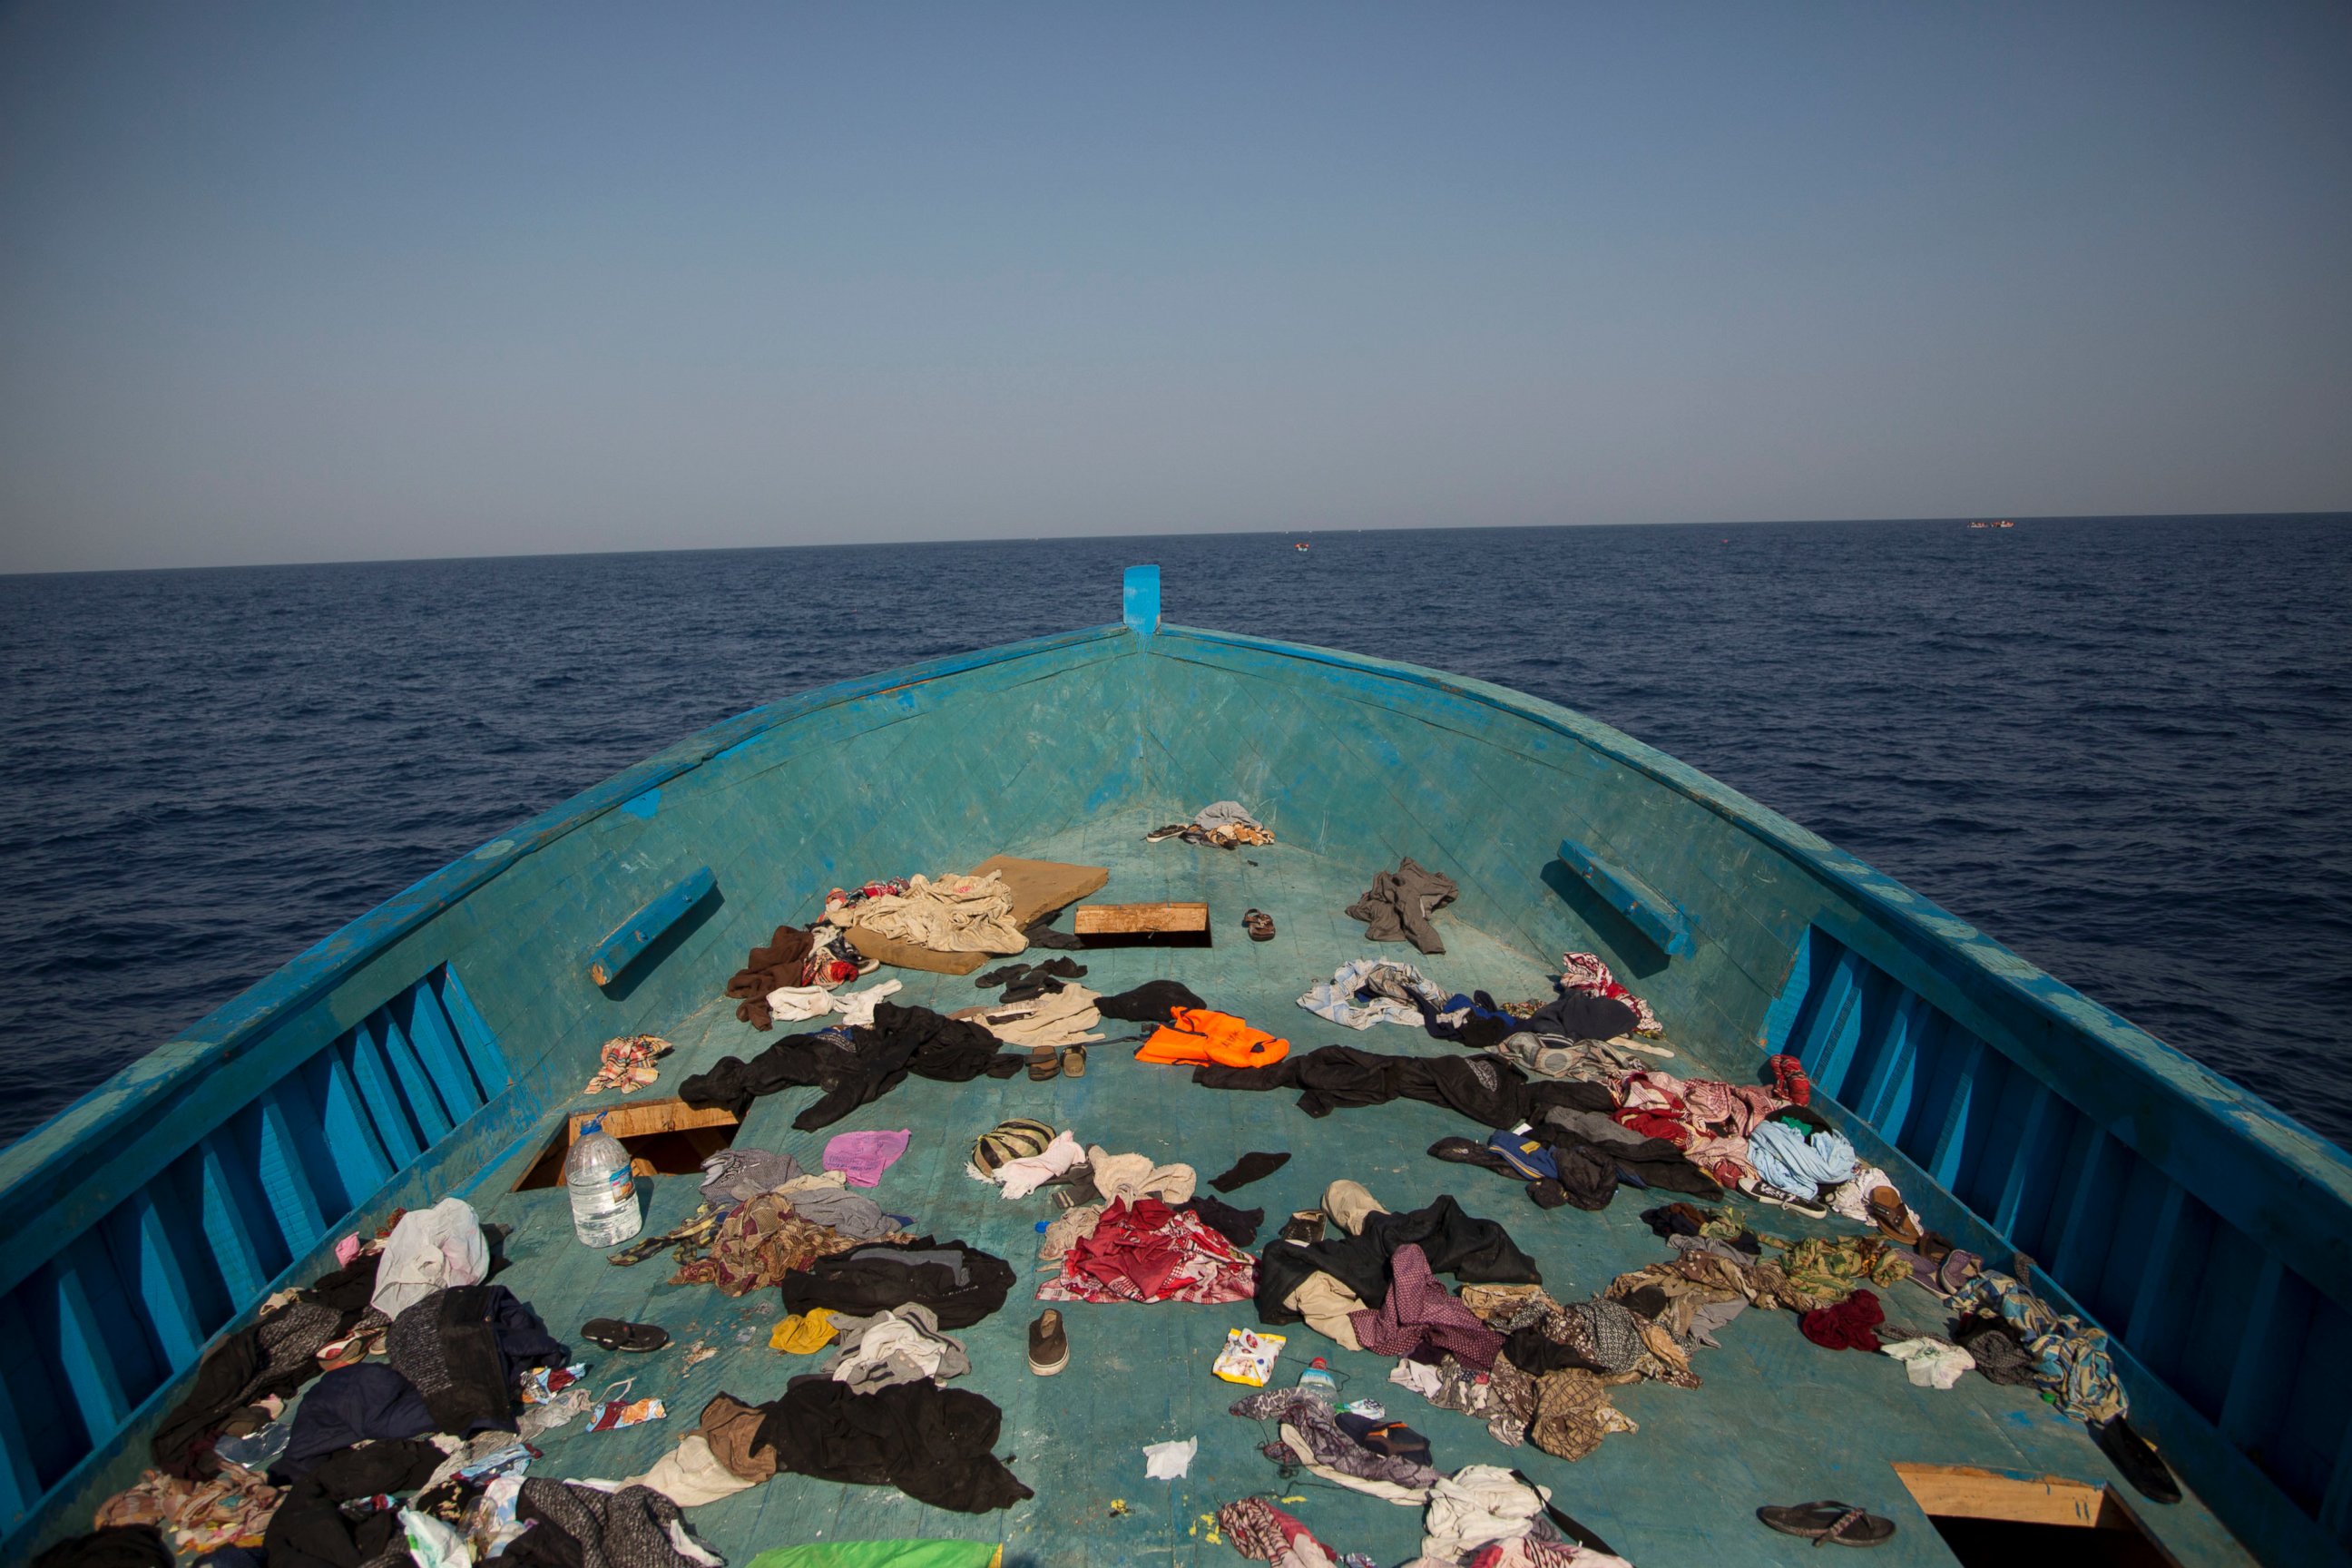 PHOTO: Belongings left behind by migrants are seen in the floor of a wooden boat where more than seven hundred migrants were fleeing Libya, during a rescue operation in the Mediterranean sea, about 13 miles north of Sabratha, Libya, Aug. 29, 2016. 